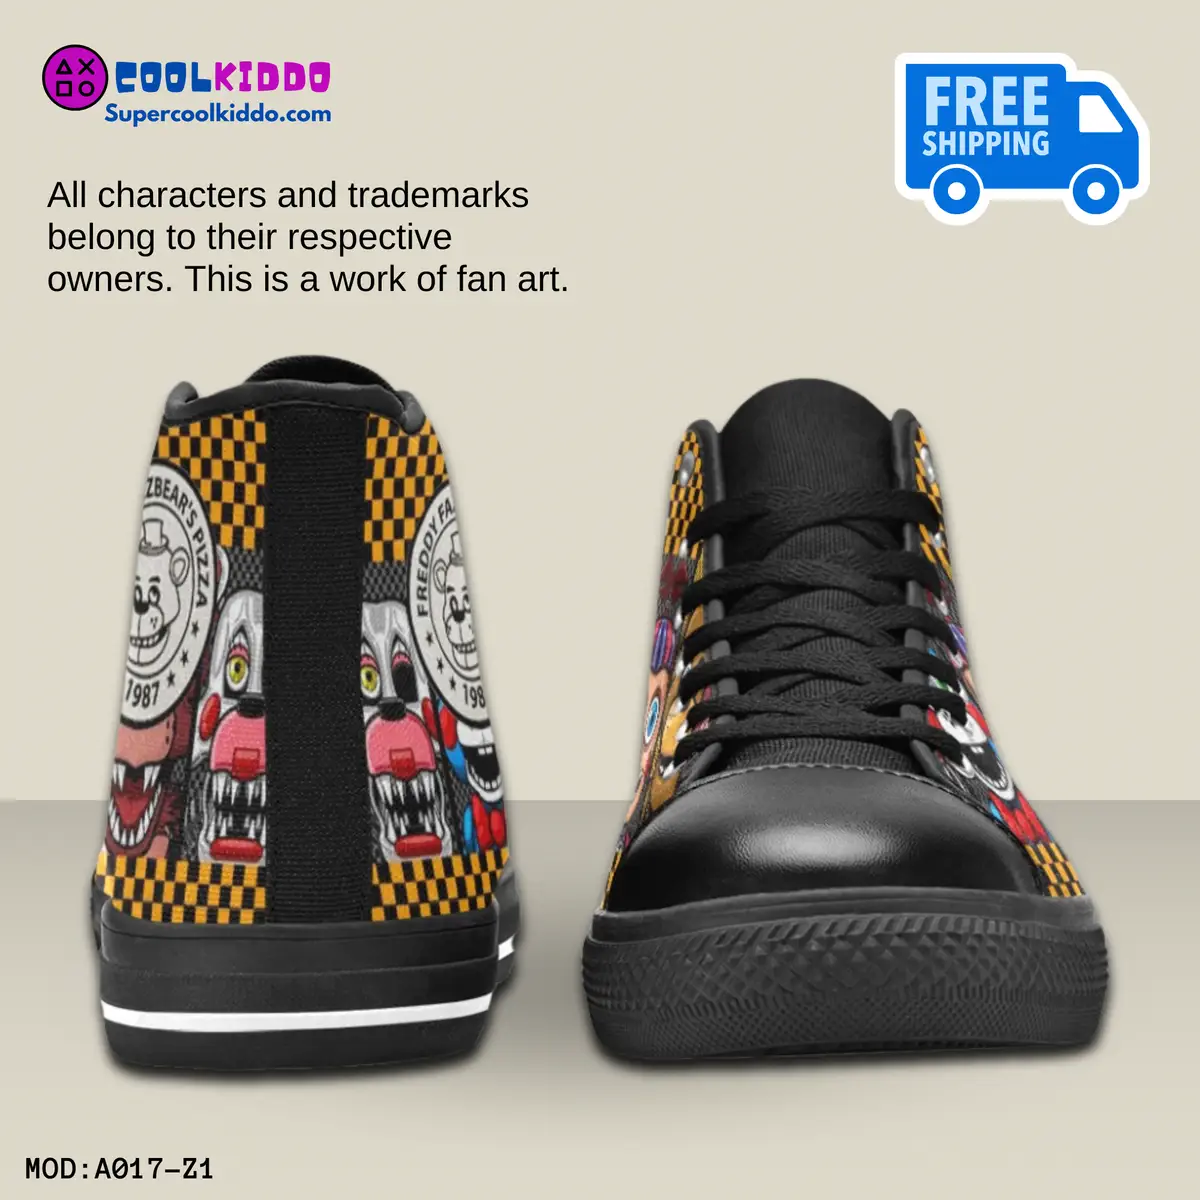 Five Nights at Freddy’s Movie Inspired High Top Shoes for Kids – Horror Characters Cool Kiddo 22